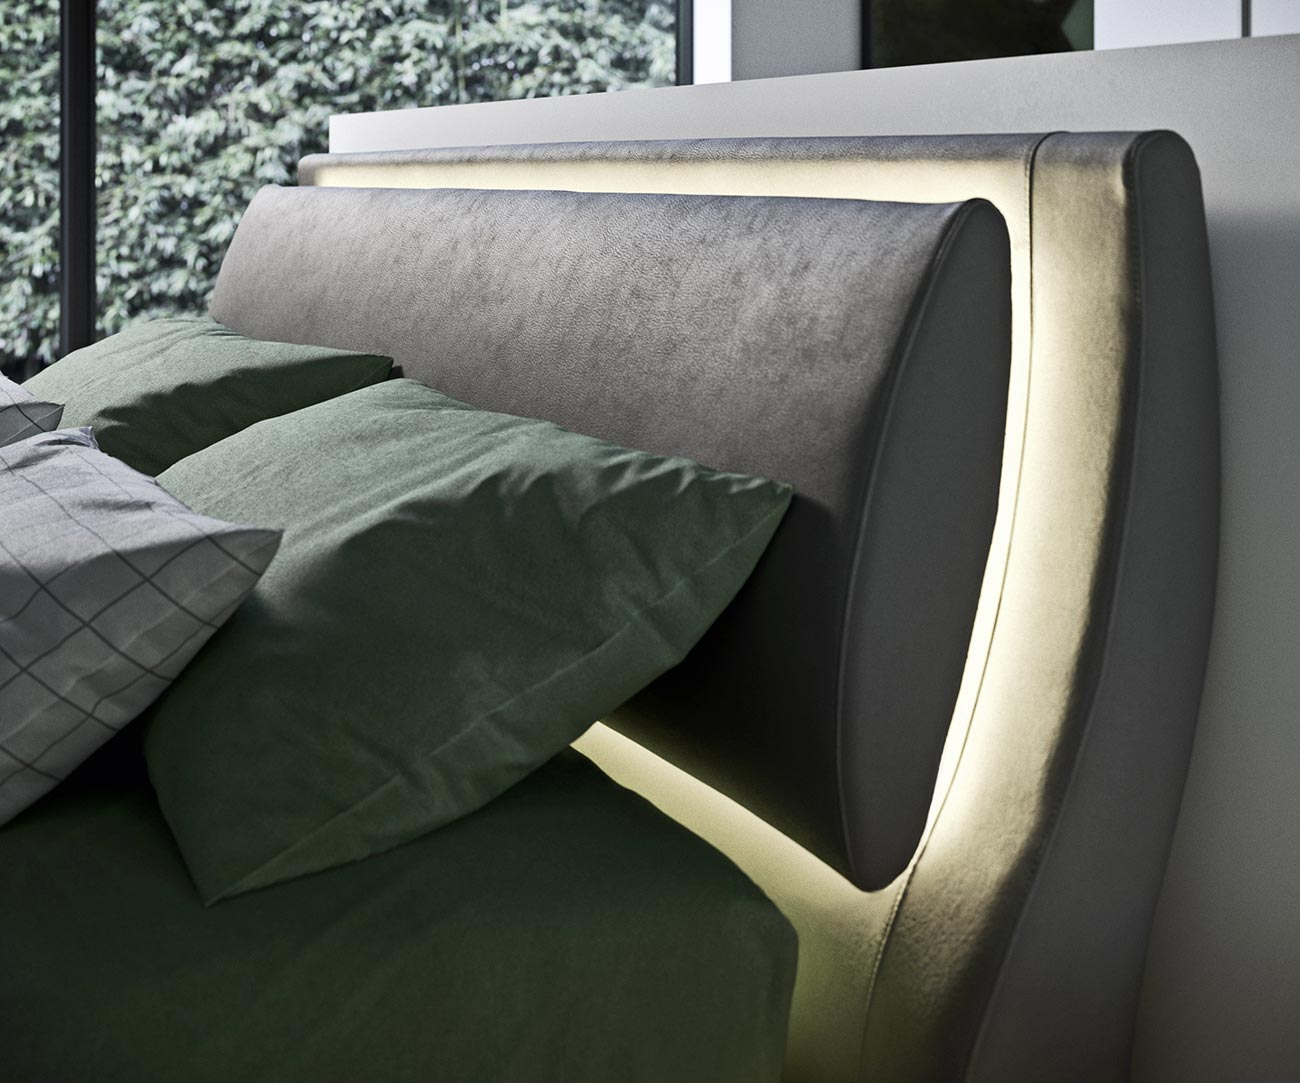 Modern double bed with LED light